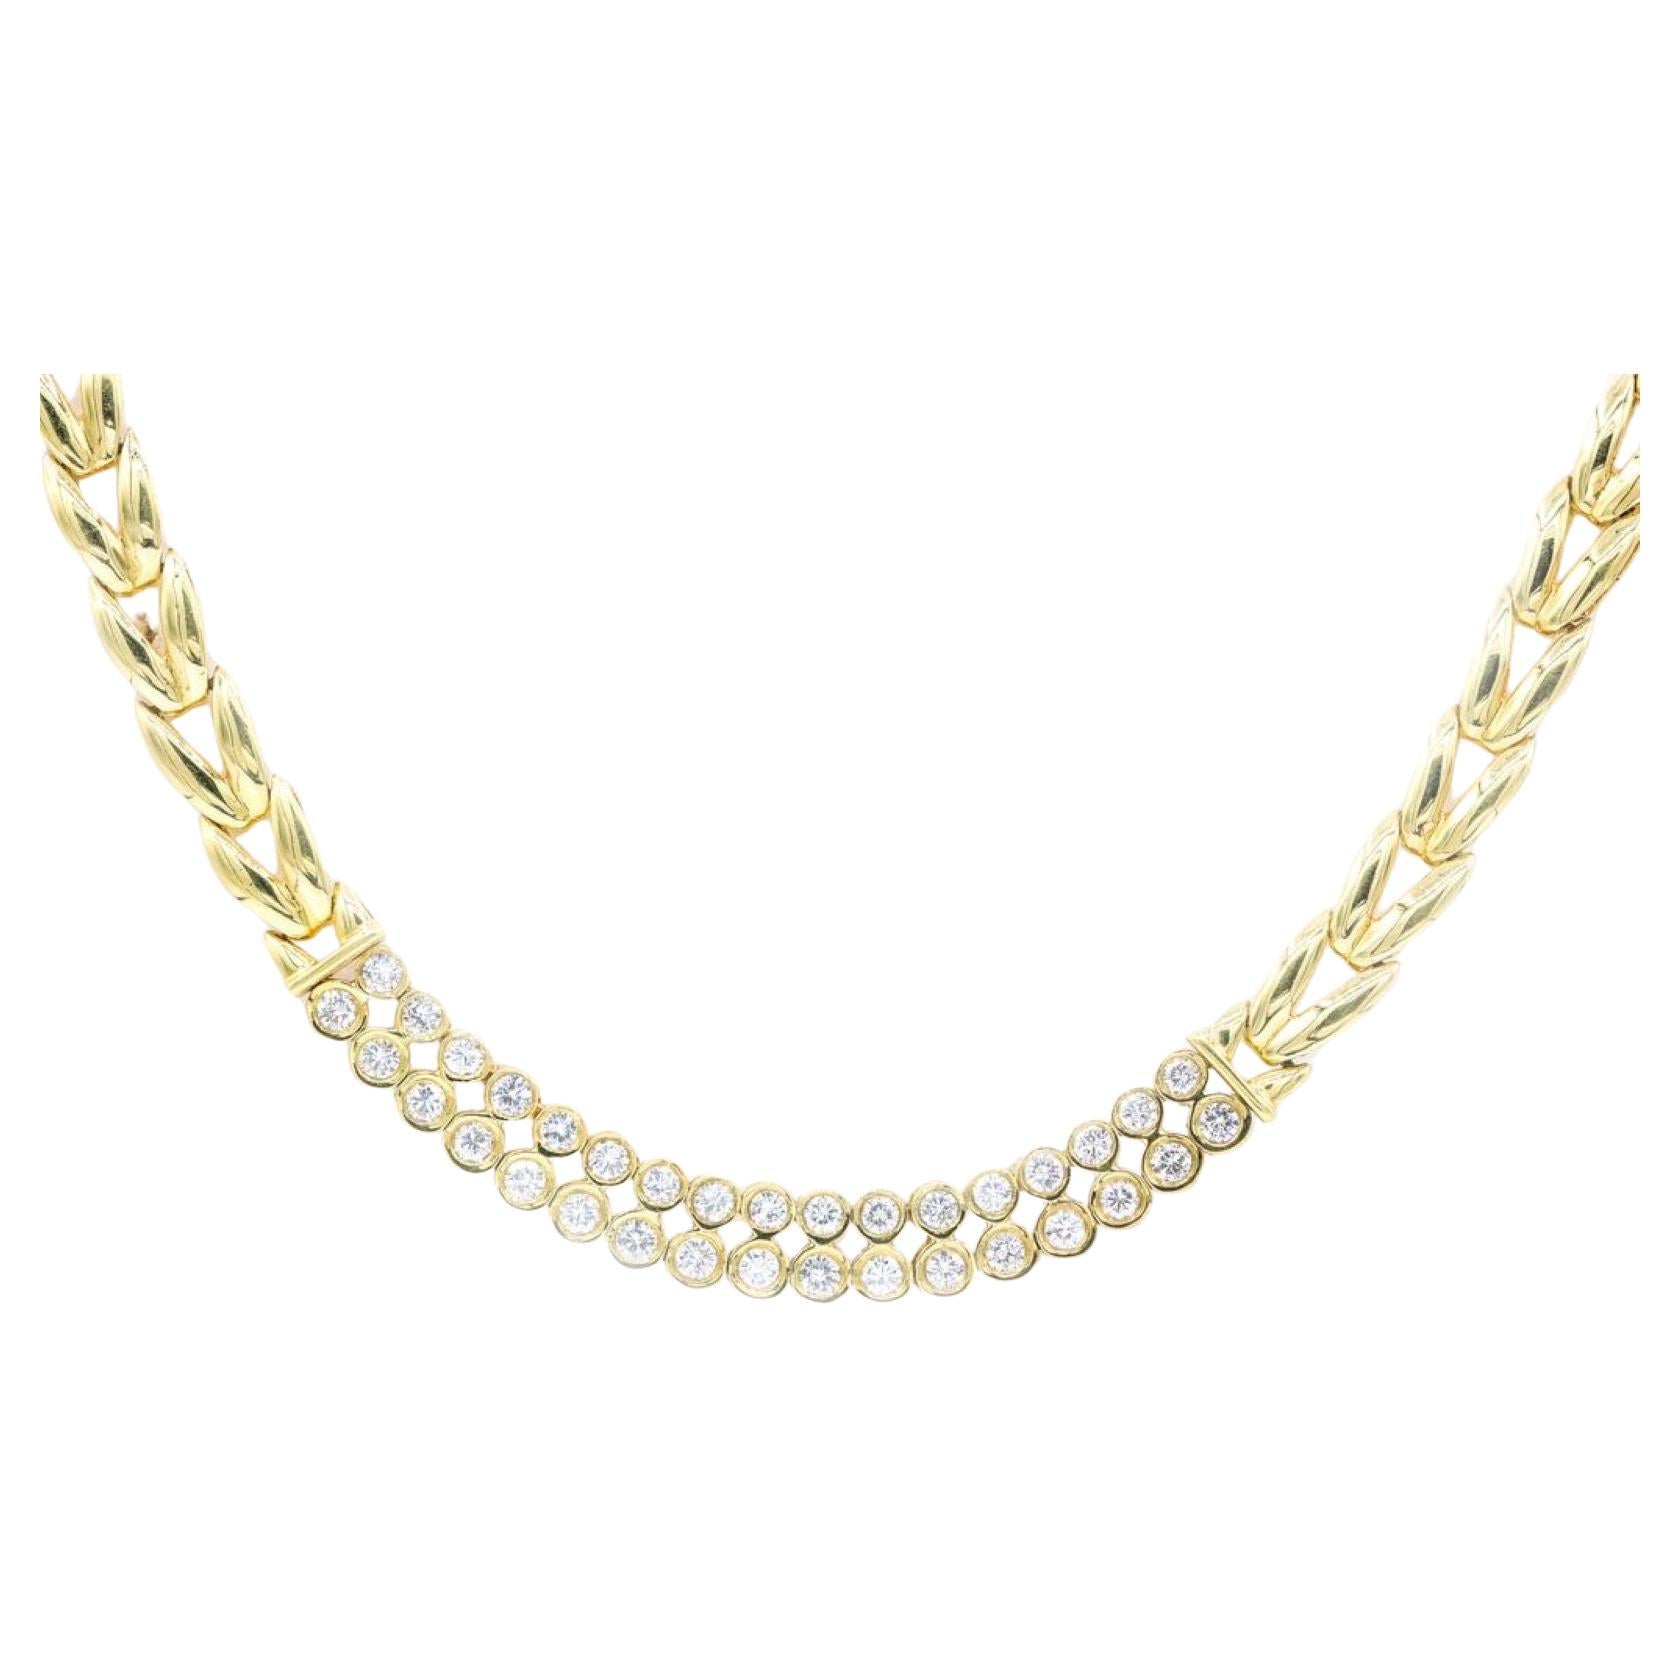 Diana M 2.05cts Diamond Choker Necklace in 14kt Yellow Gold For Sale